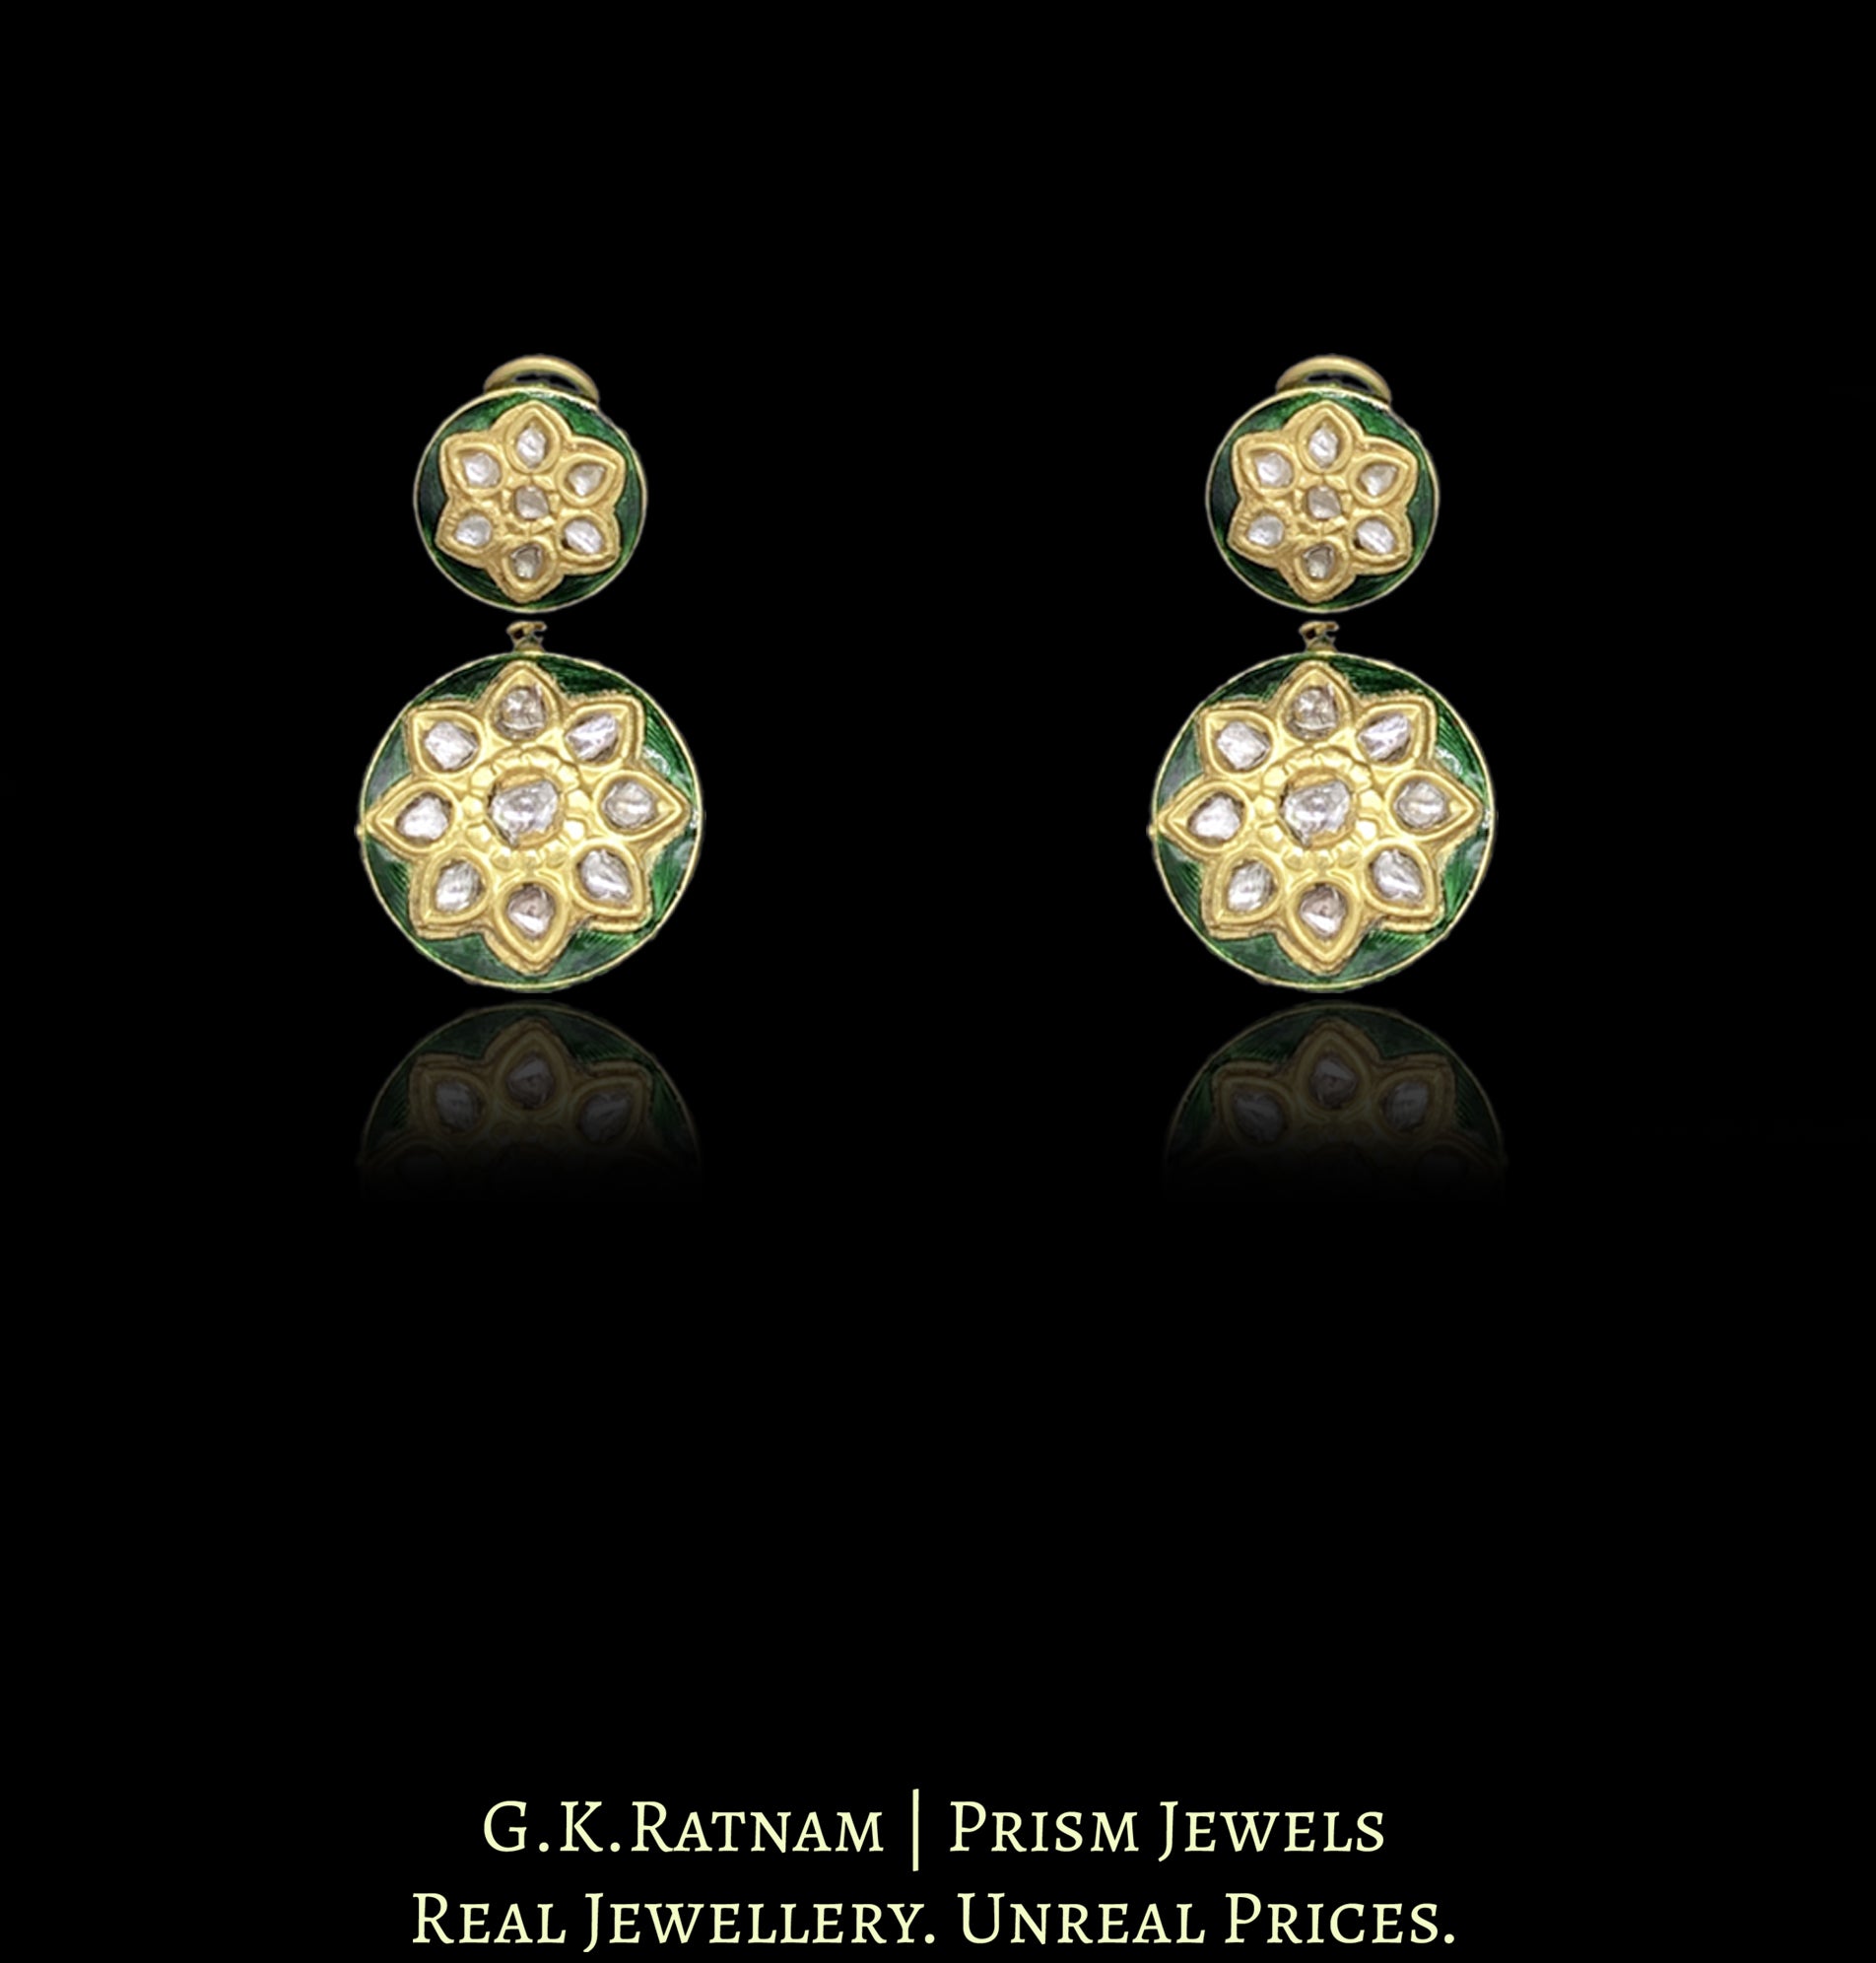 23k Gold and Diamond Polki Necklace Set with green enamelled rounds crocheted in lustrous pearls